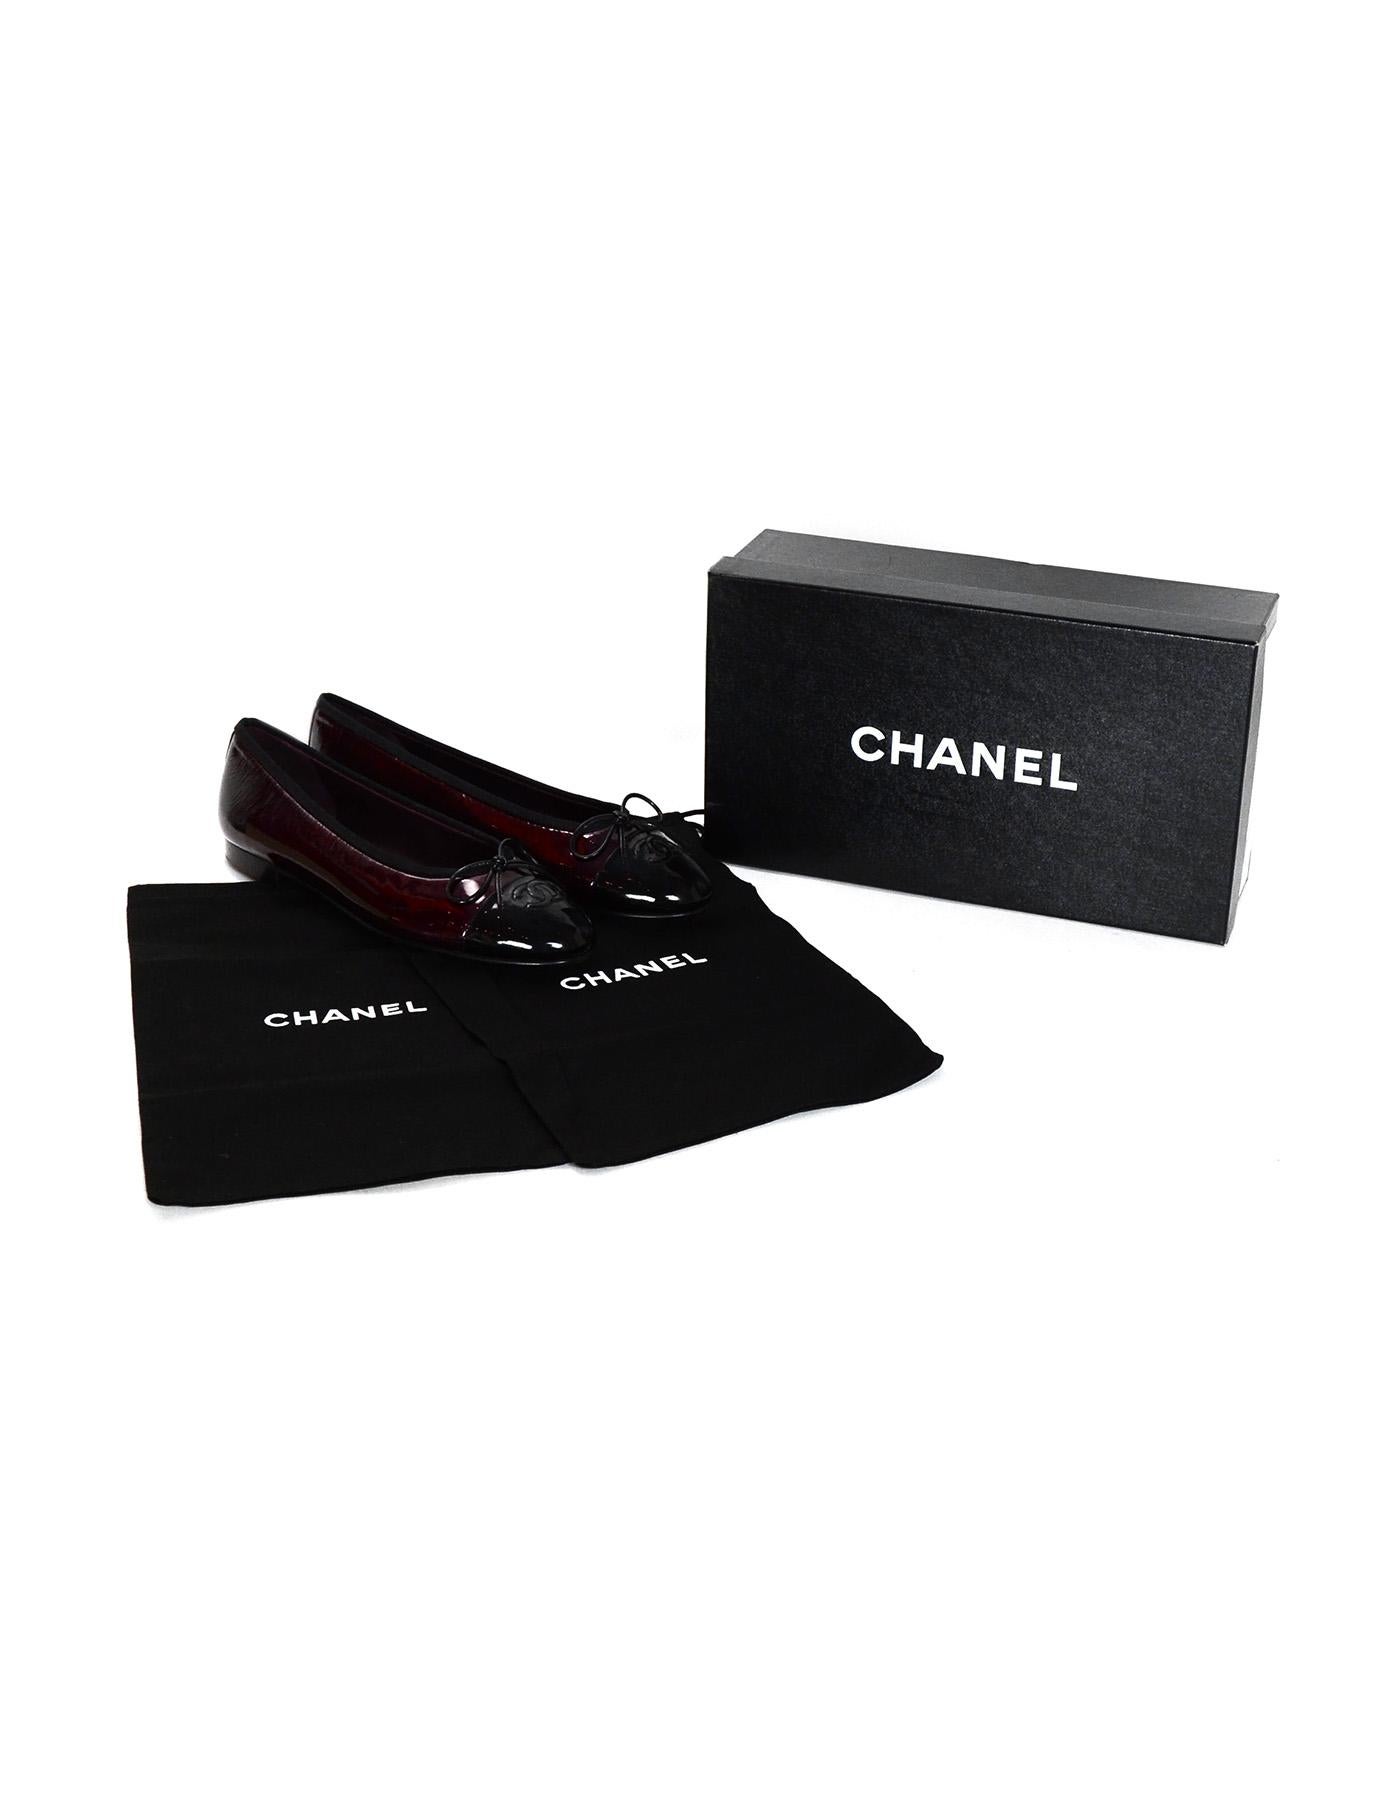 Chanel New Bordeaux/Black Patent Leather Cap Toe CC Ballet Flats Sz 38

Made In: Italy
Year of Production: 2008
Color: Bordeaux/black
Materials: Patent leather
Closure/Opening: Slide on
Overall Condition: Like new condition in original box
Retail: